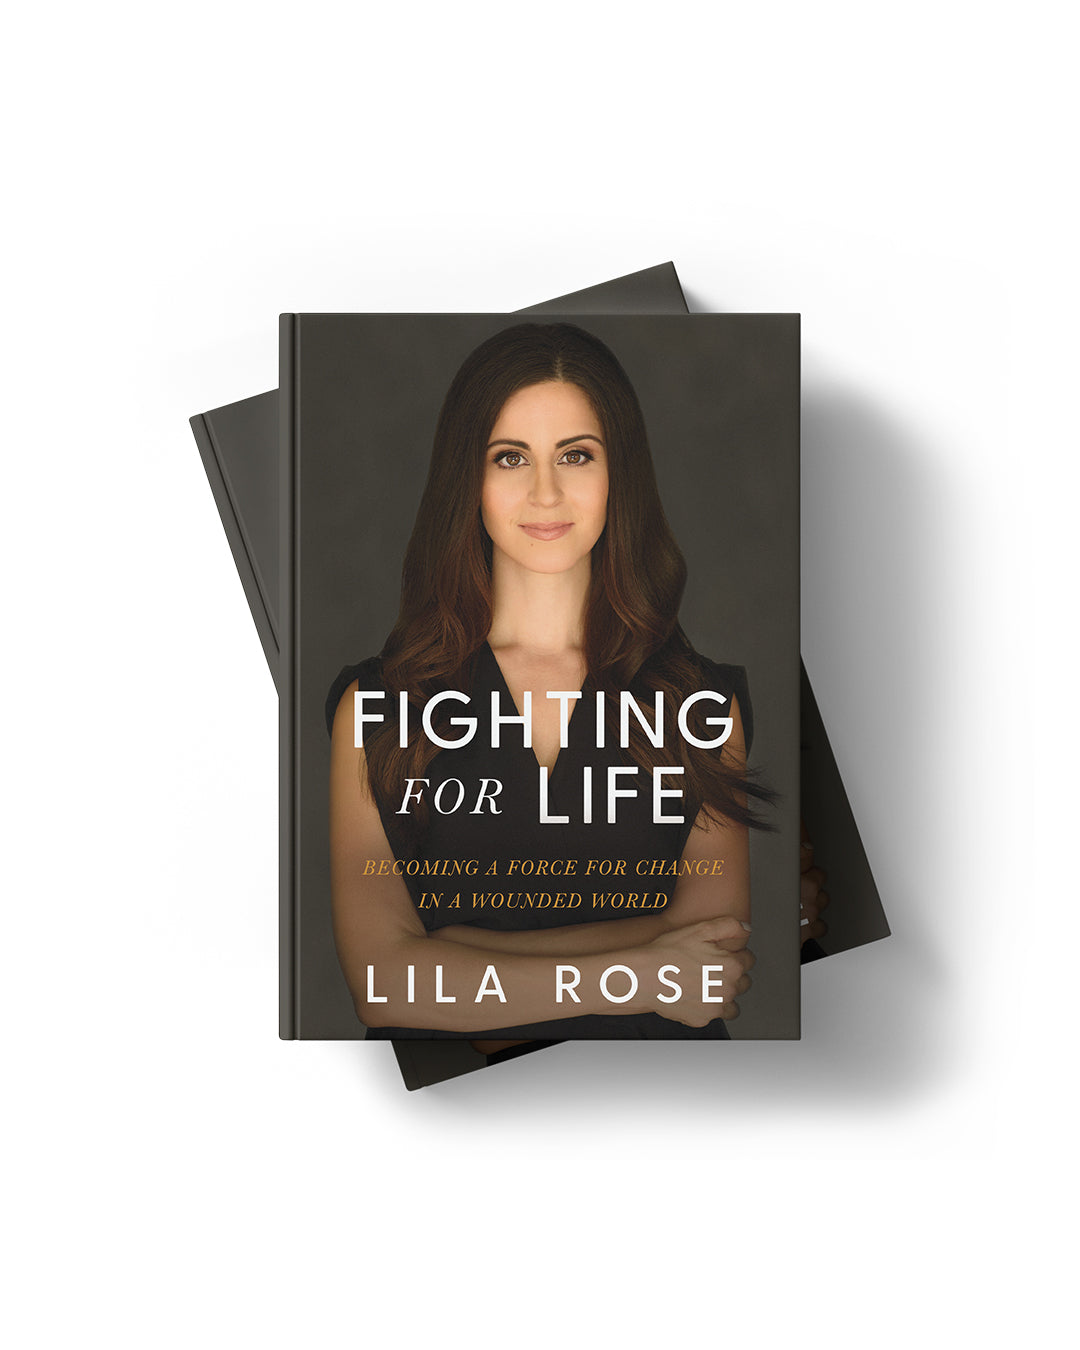 Fighting For Life by Lila Rose, Live Action Founder